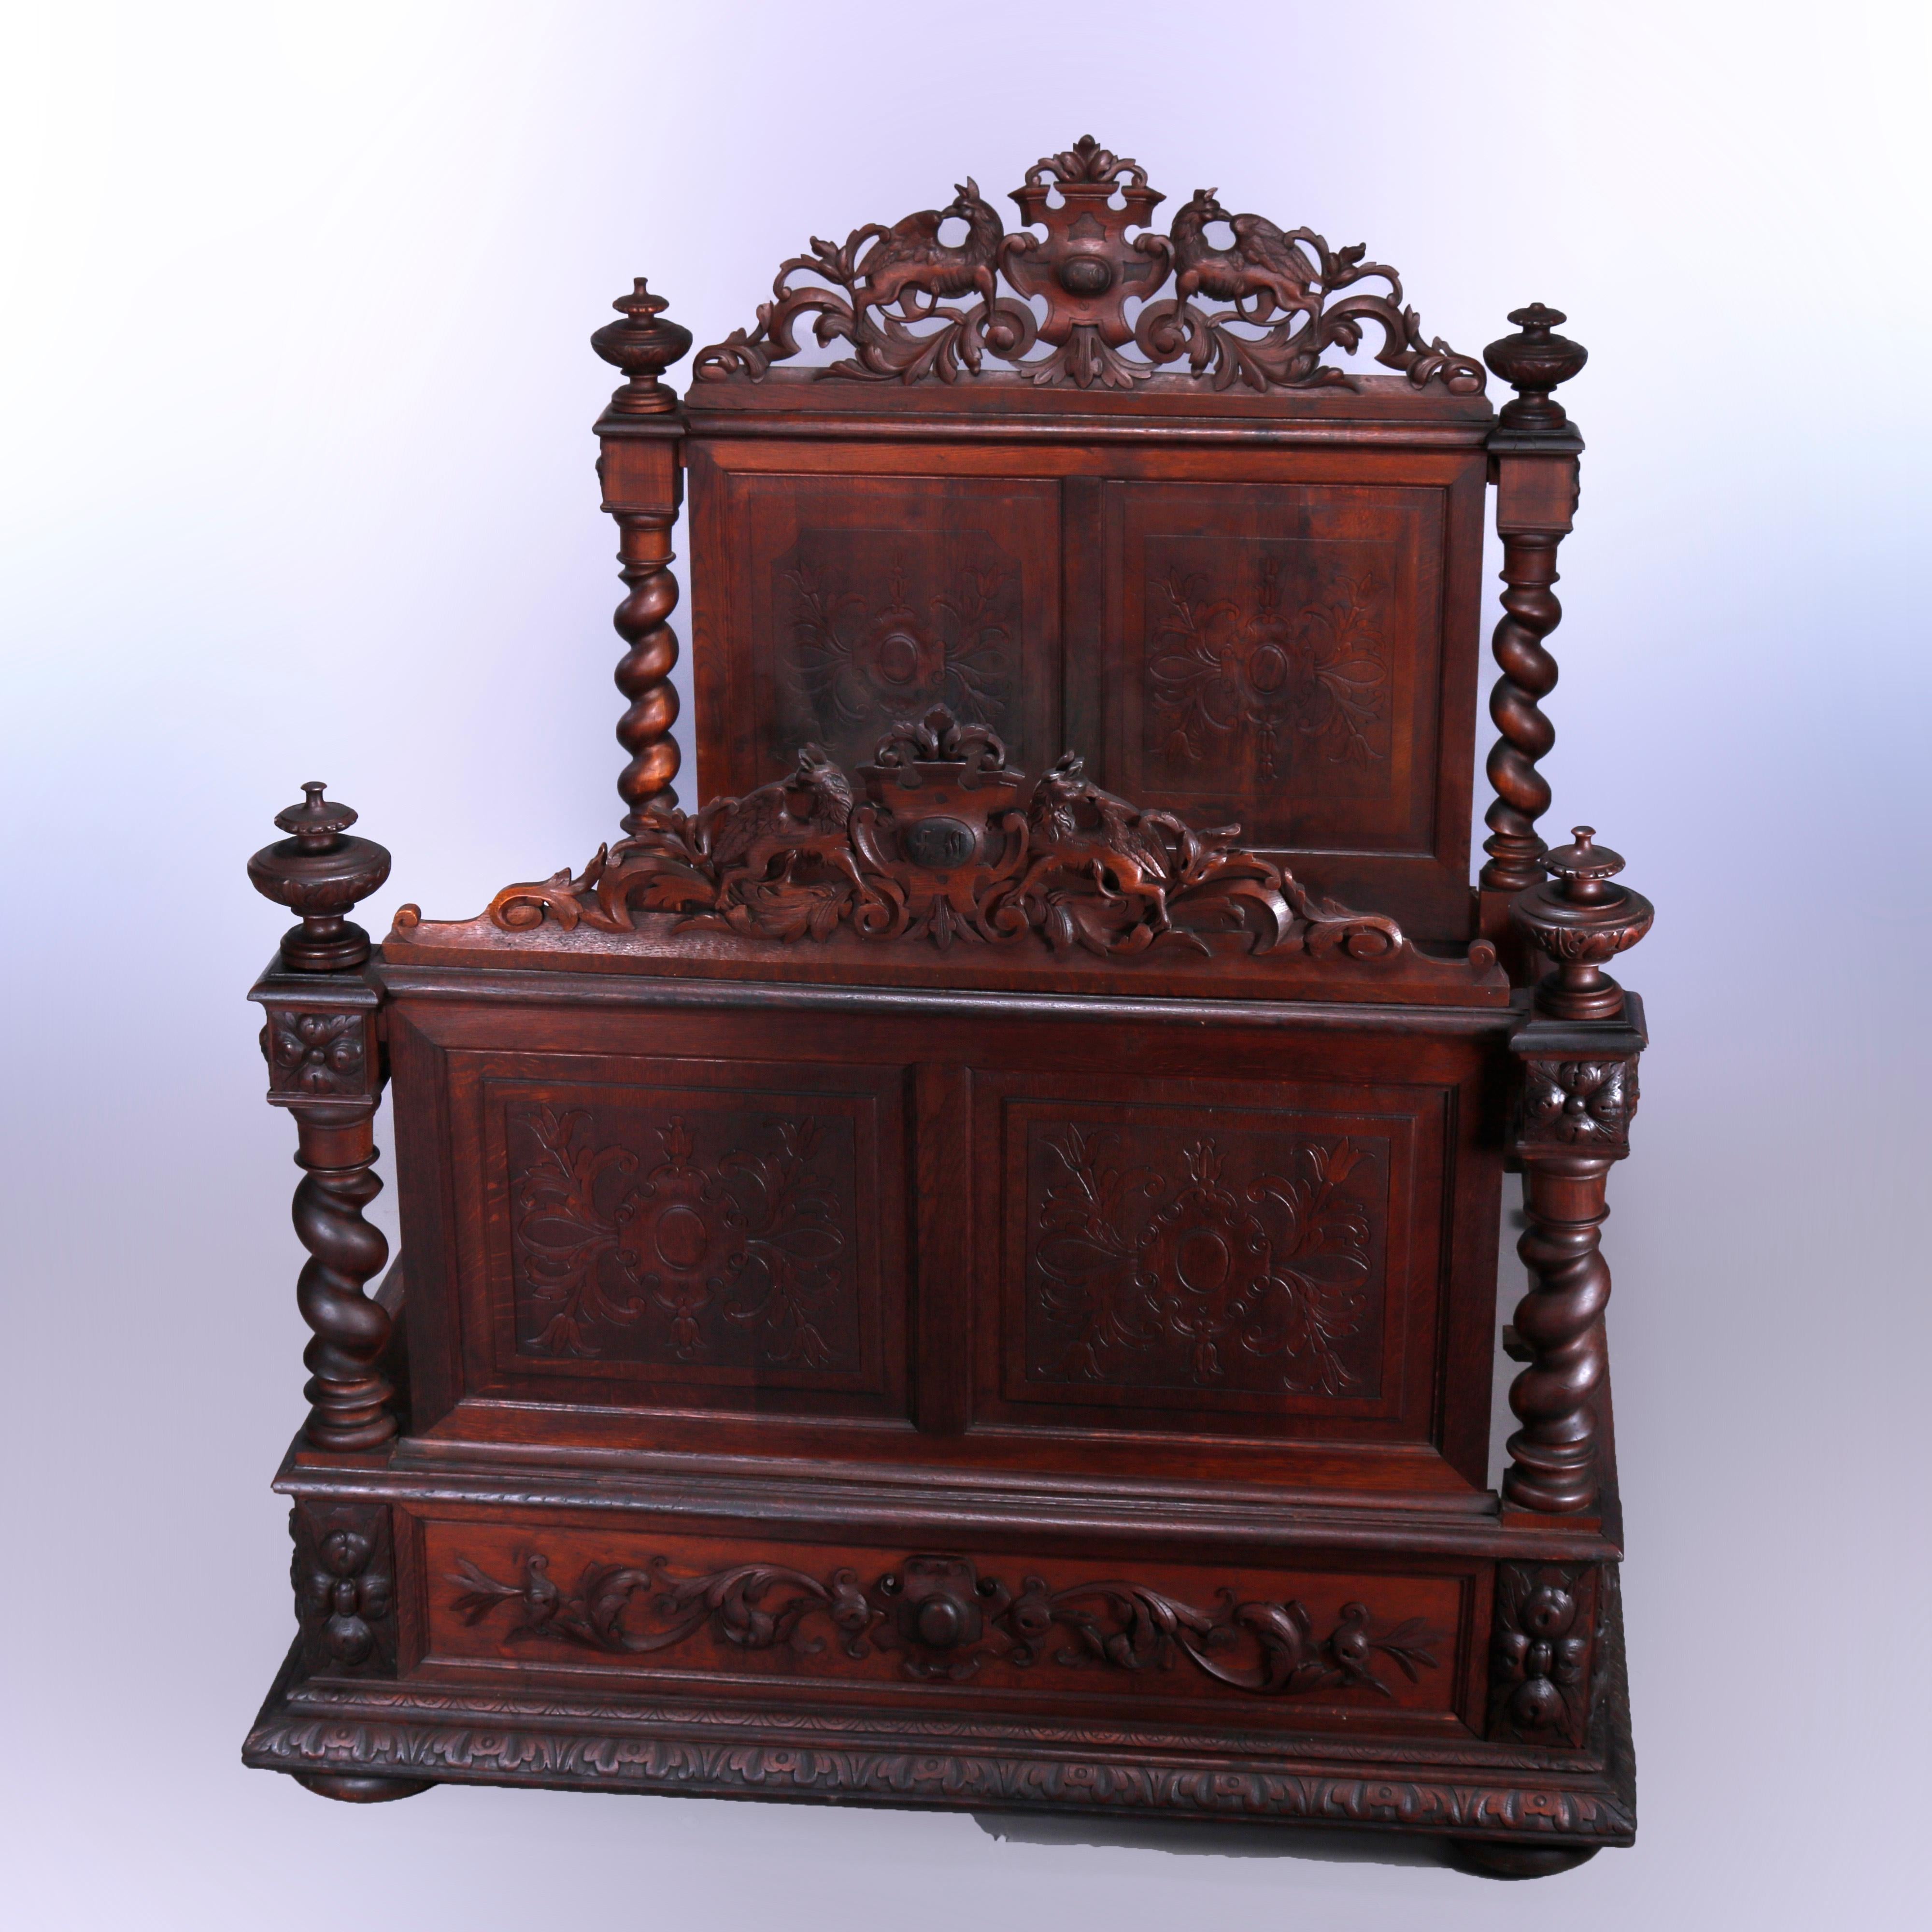 An antique English Elizabethan figural full size bed offers oak construction with carved and pierced crest having foliate elements and flanking griffIns over head and foot boards with raised panels having central shield and flowers, flanking rope